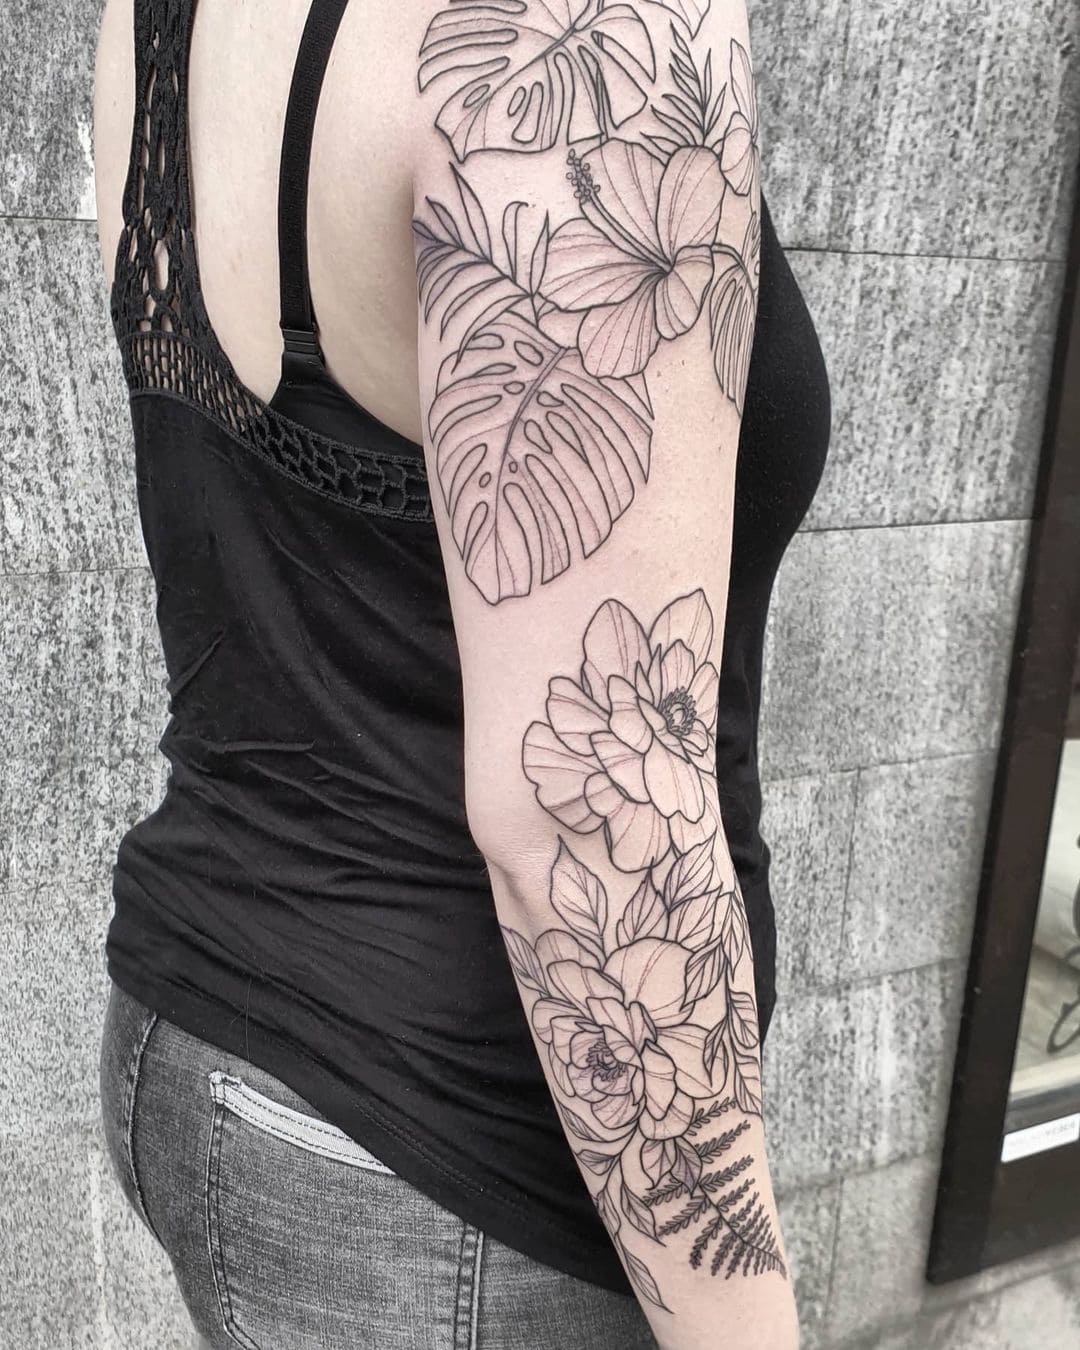 Lotus and Fern - a tattoo by Northern Black